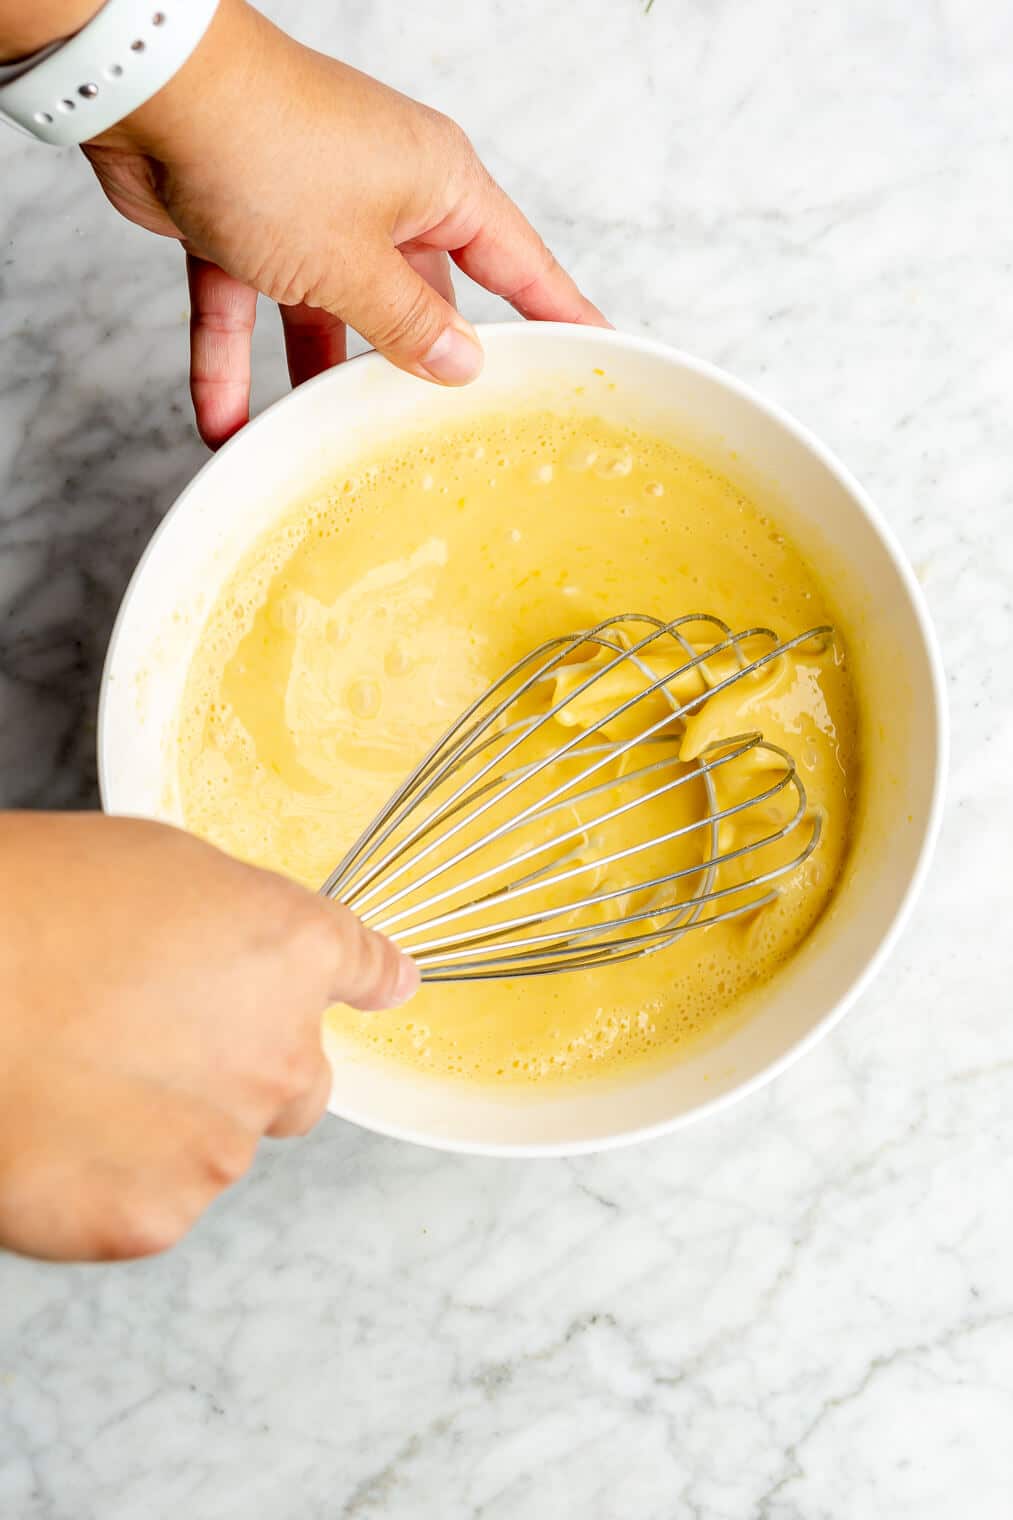 A person whisking together a yellow liquid in the process of making lemon curd.